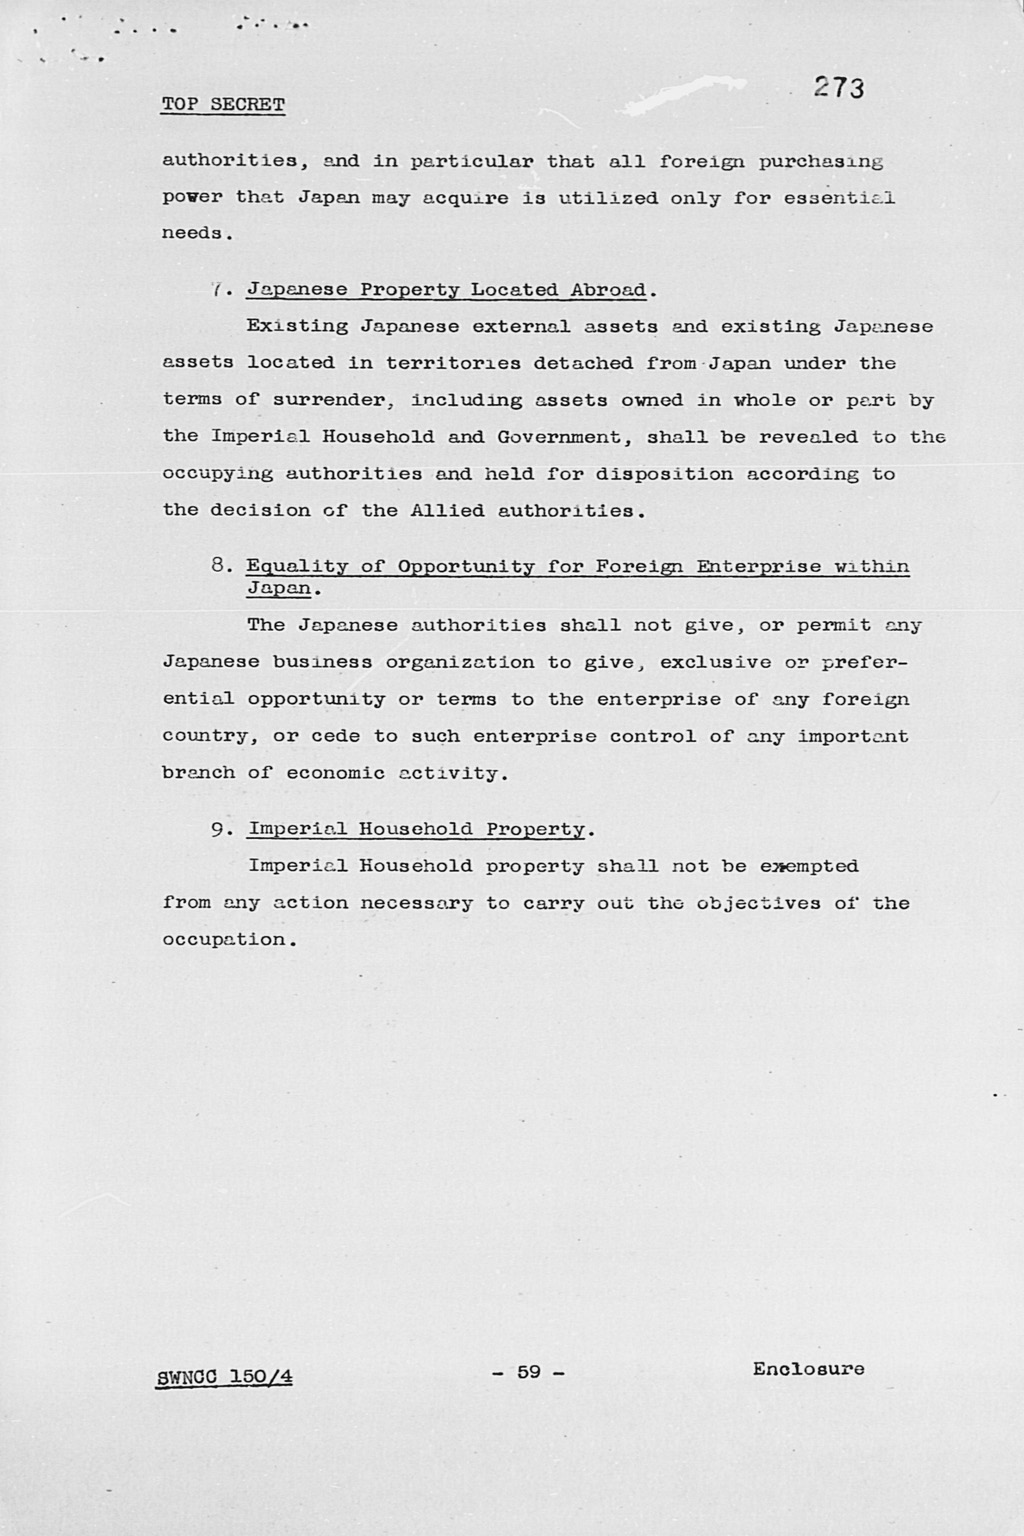 [United States Initial Post-Surrender Policy for Japan (SWNCC150/4)](Larger image)